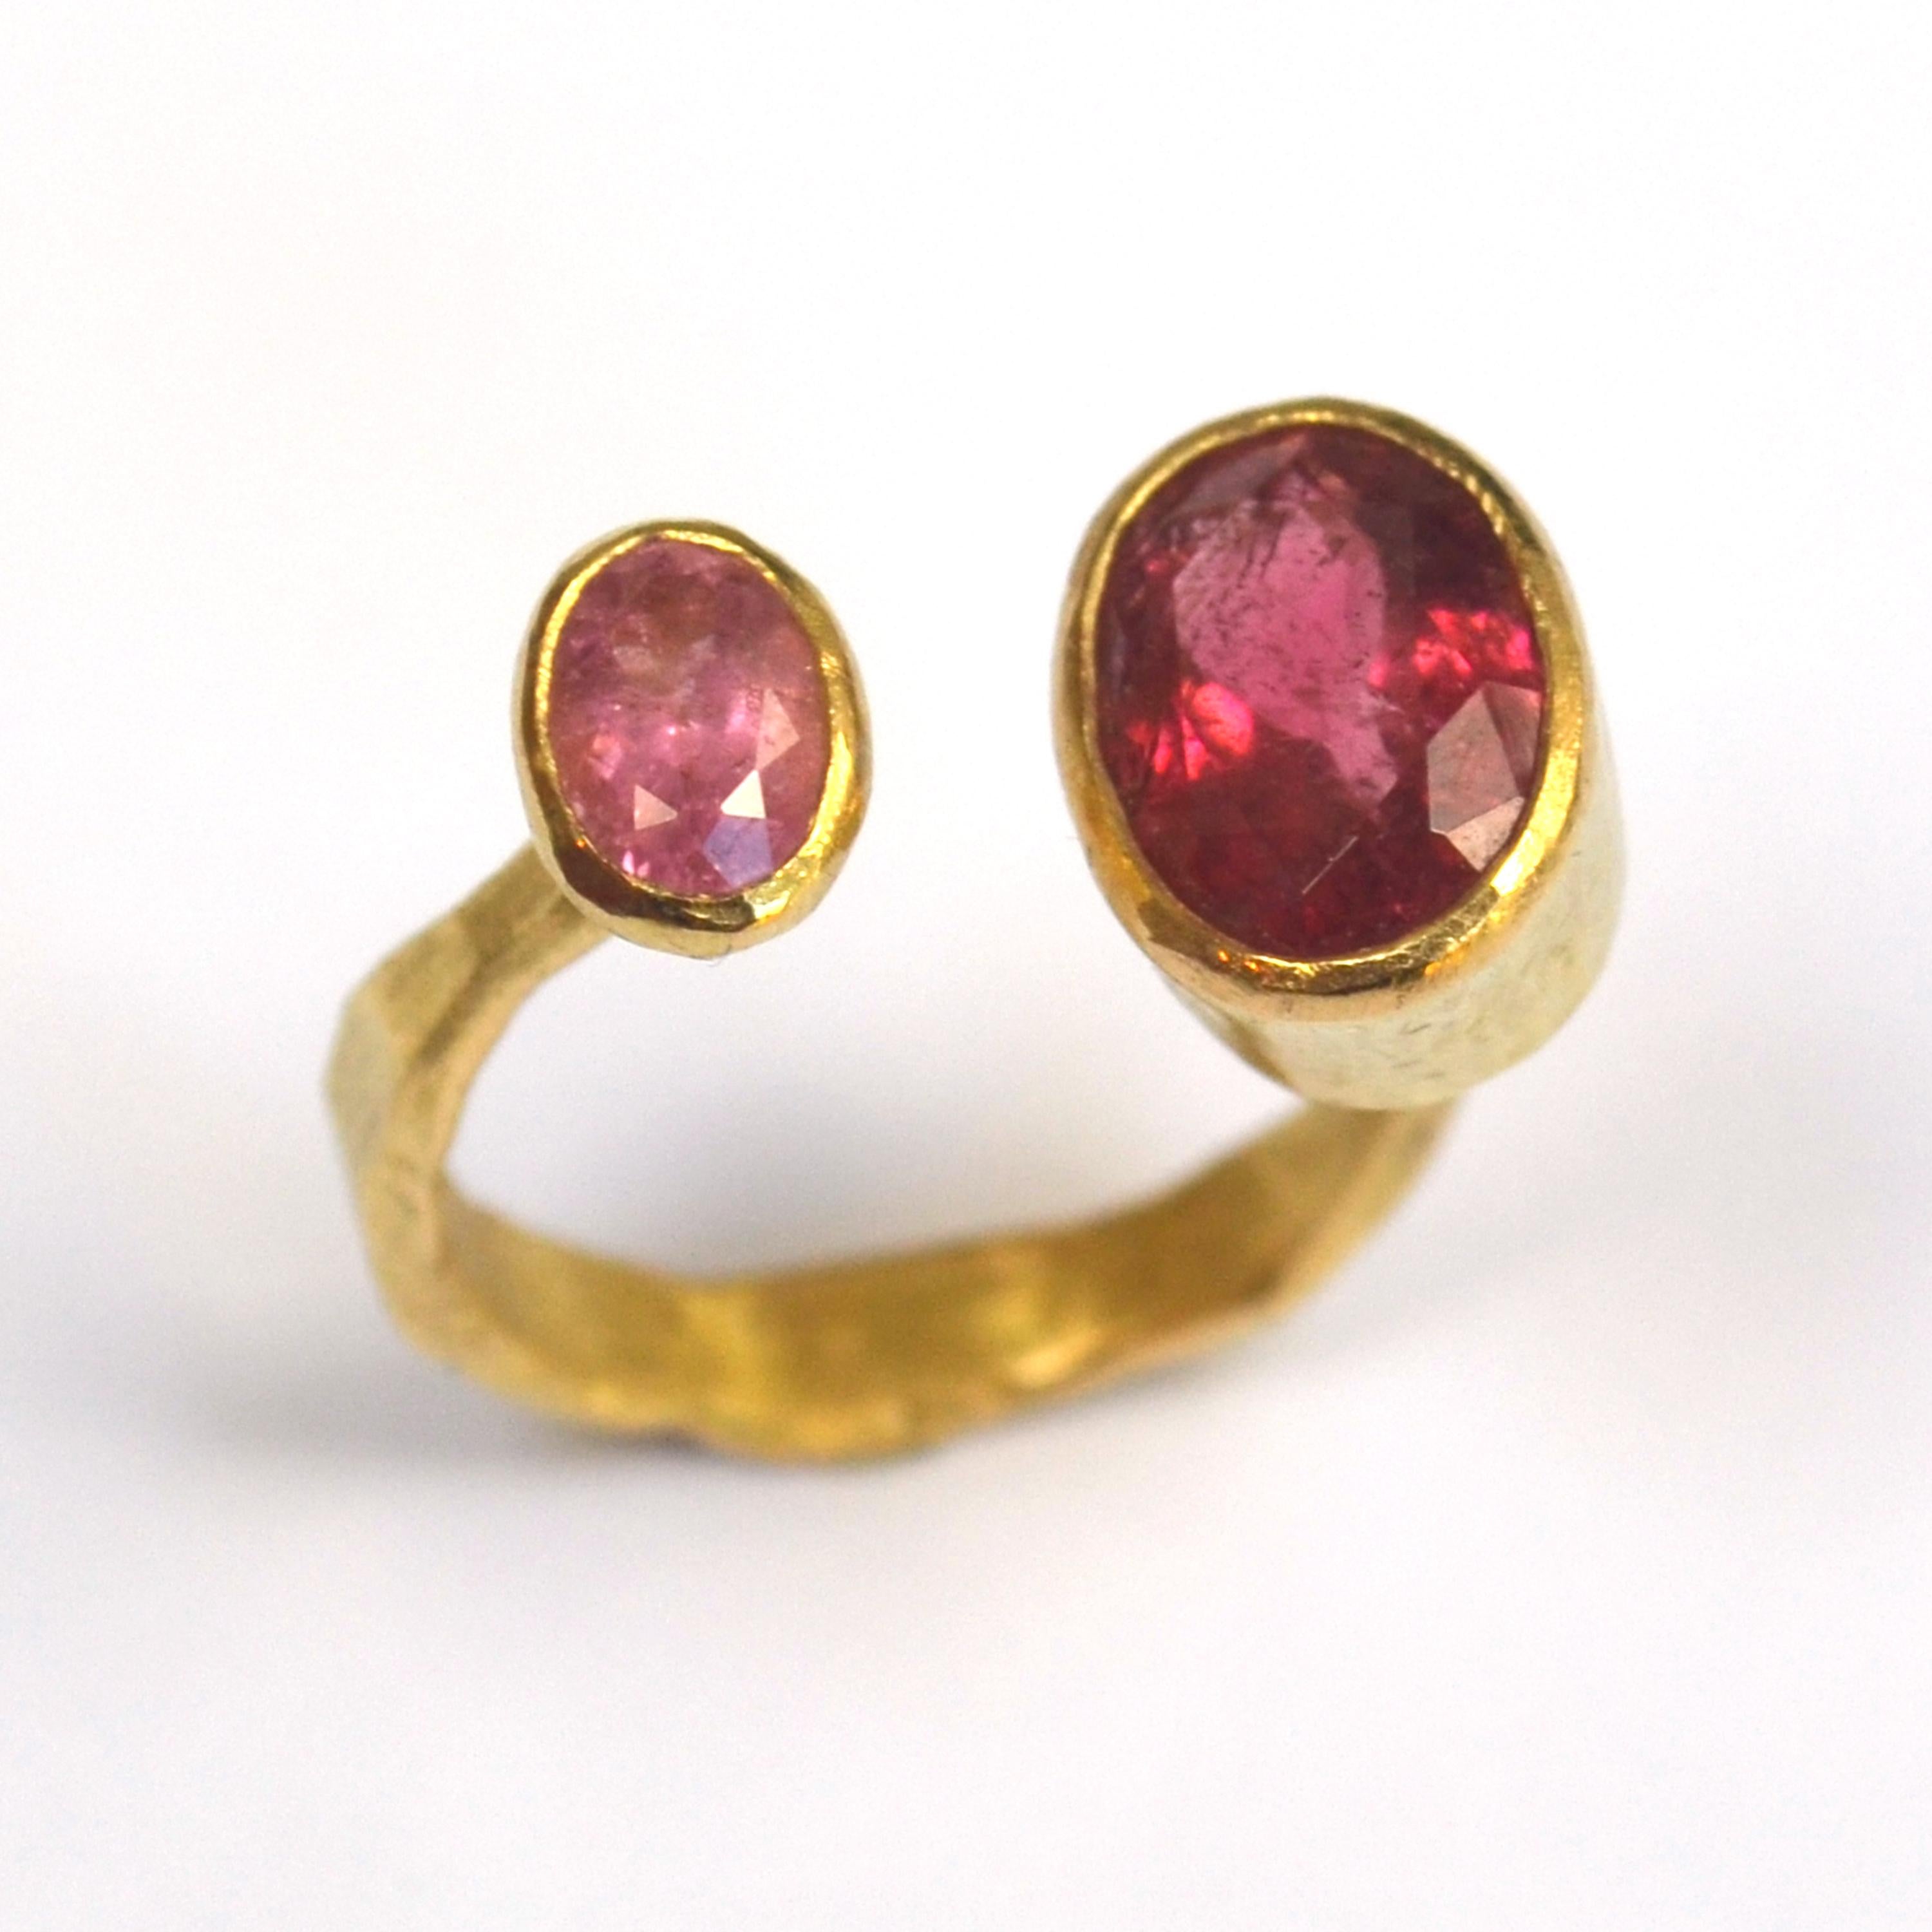 Contemporary Double Pink Tourmaline 18 Karat Gold Handmade Ring by Disa Allsopp For Sale 3